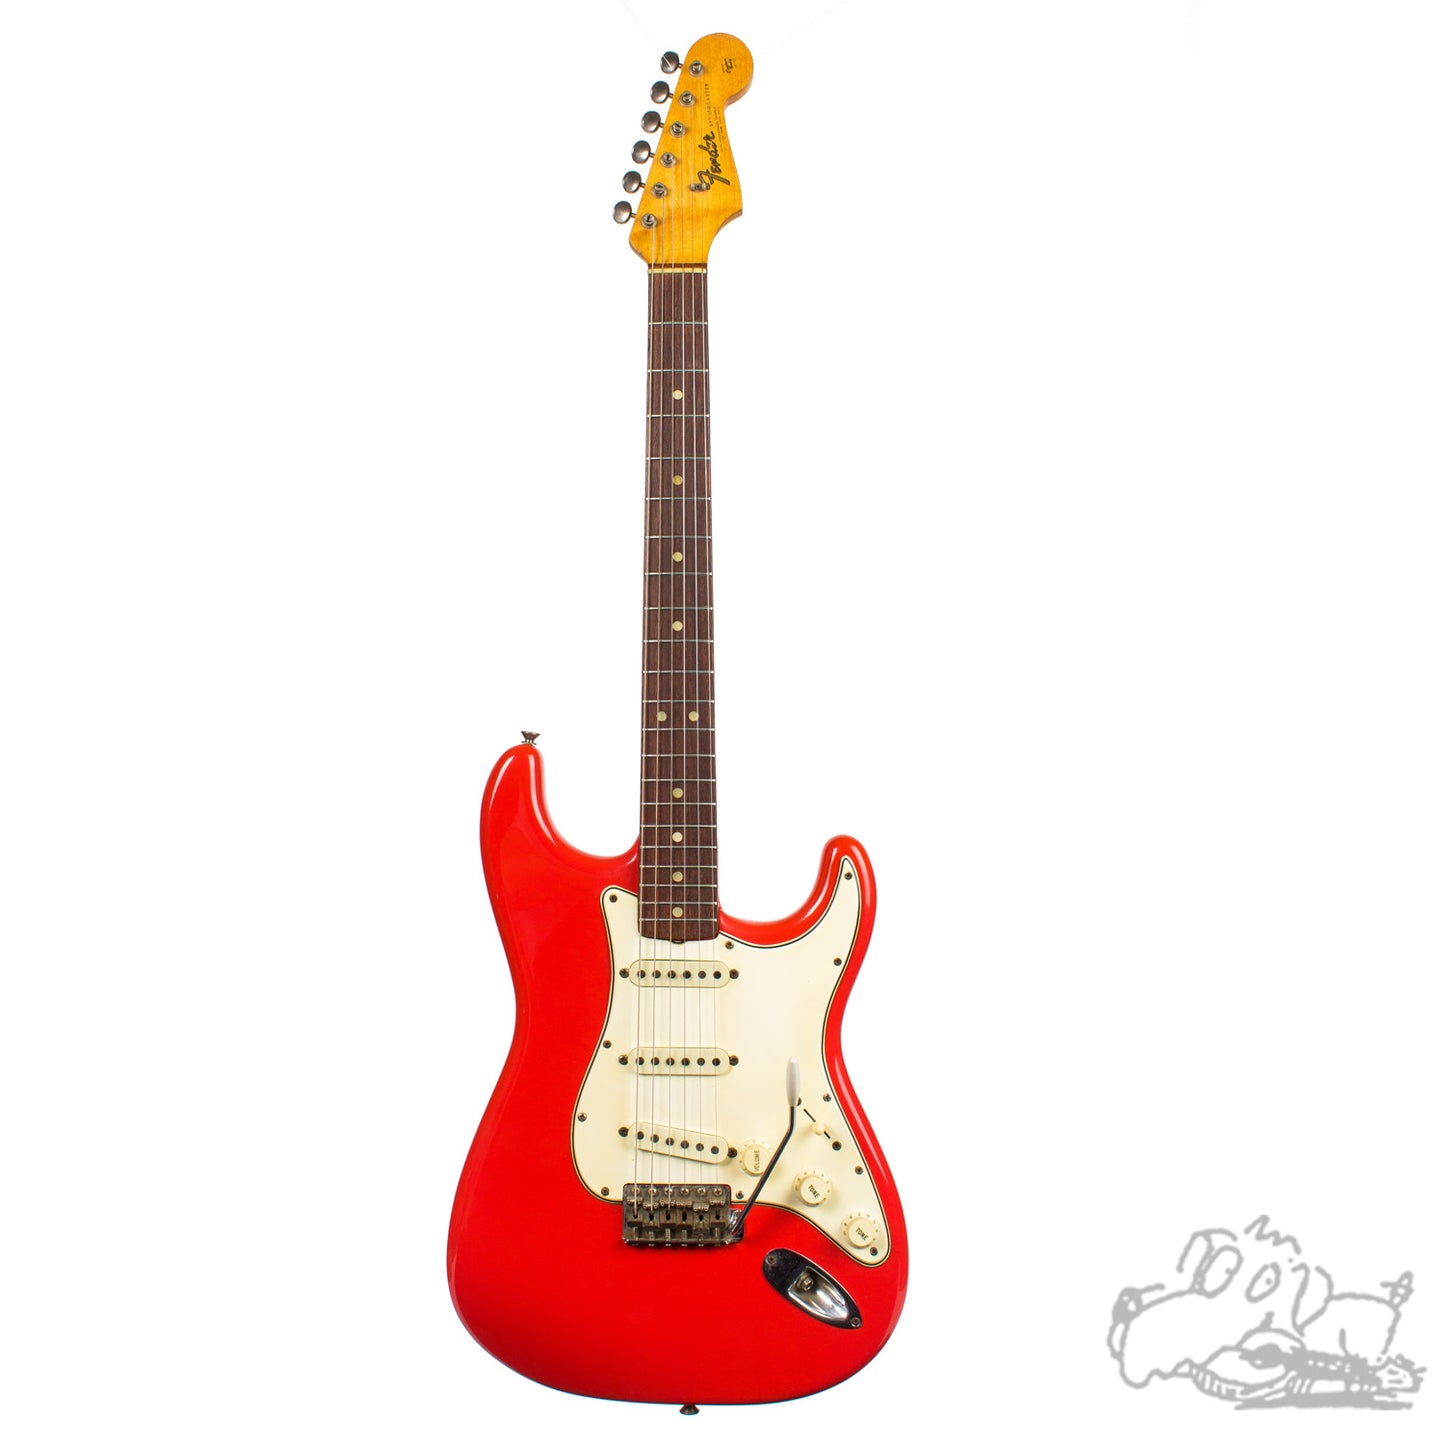 1965 Fender Stratocaster refinished in Fiesta Red